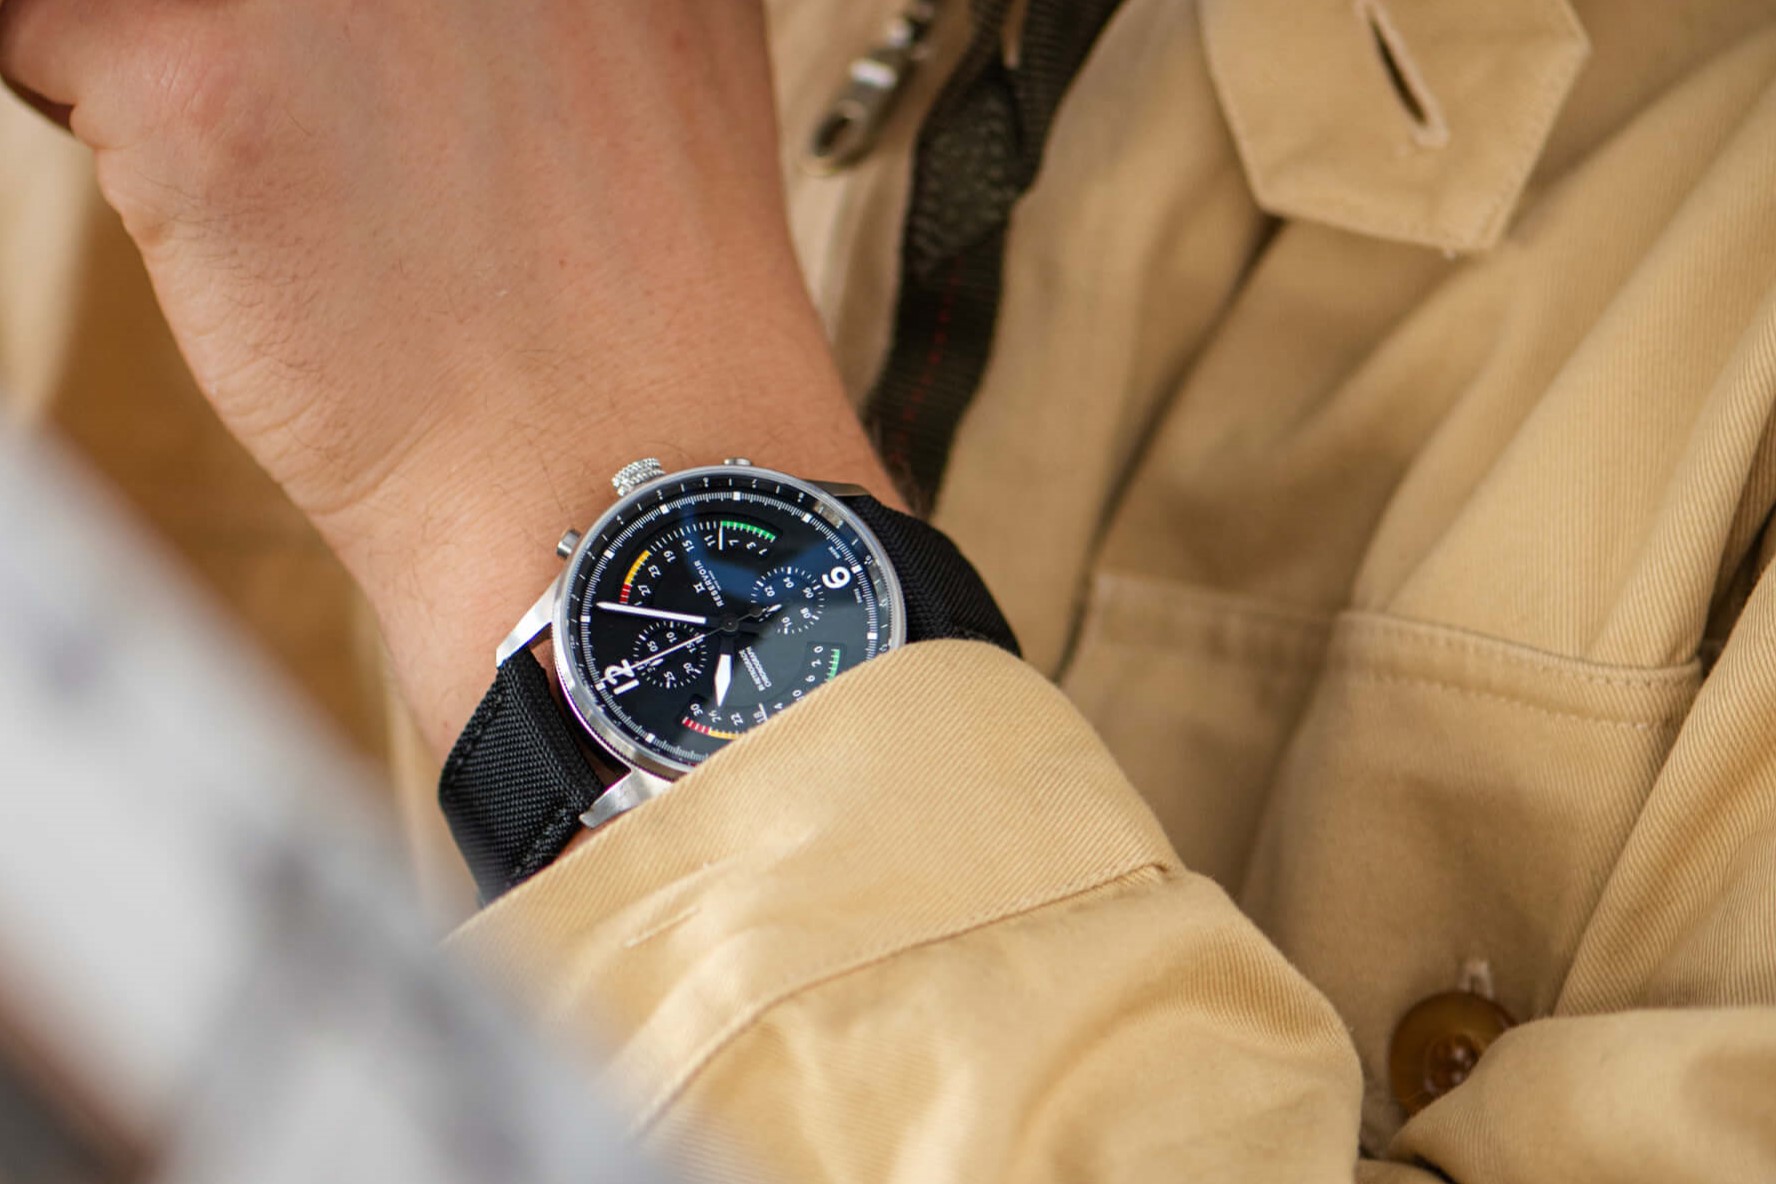 Reservoir Spells It Out With The Airfight Chronograph ? Yes, It?s A Pilot?s Watch